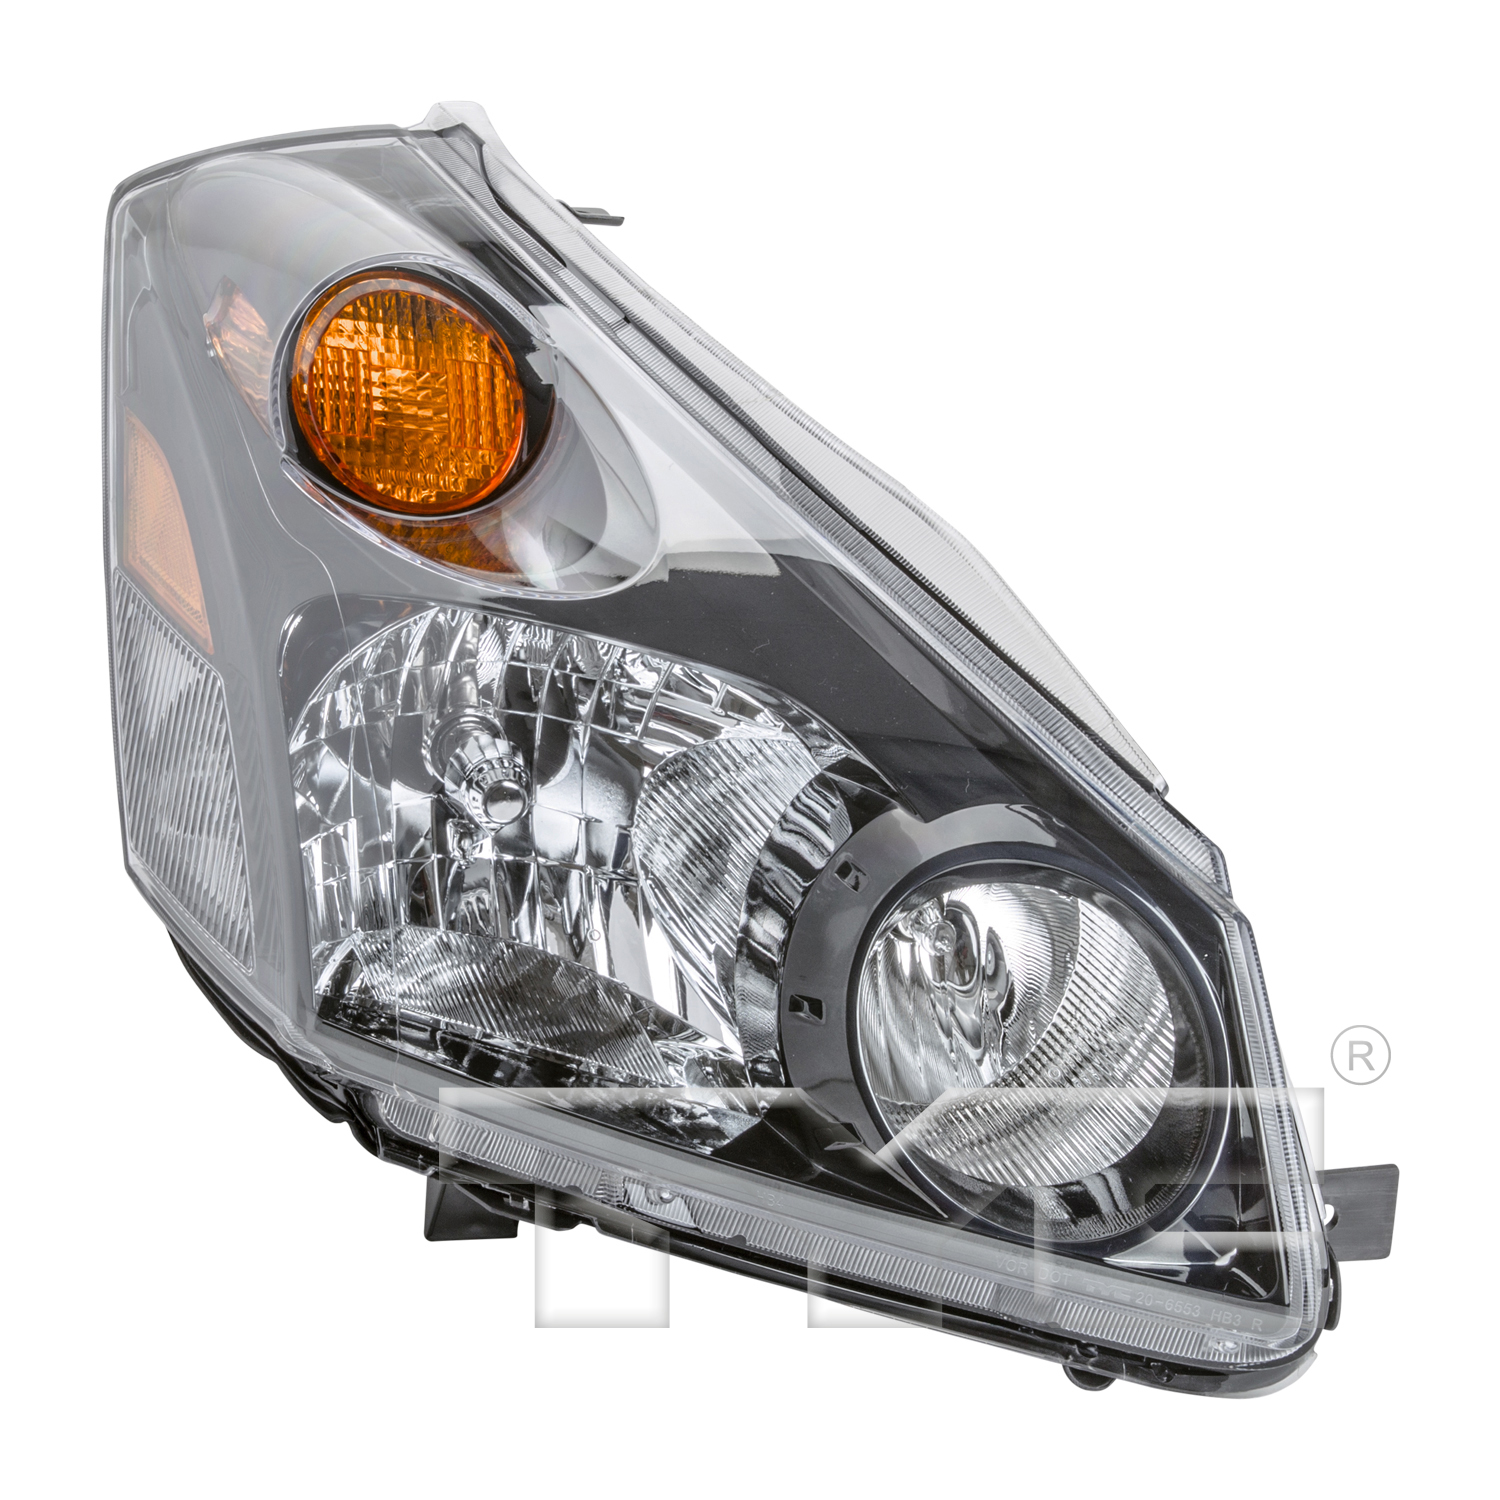 Aftermarket HEADLIGHTS for NISSAN - QUEST, QUEST,04-09,RT Headlamp assy composite